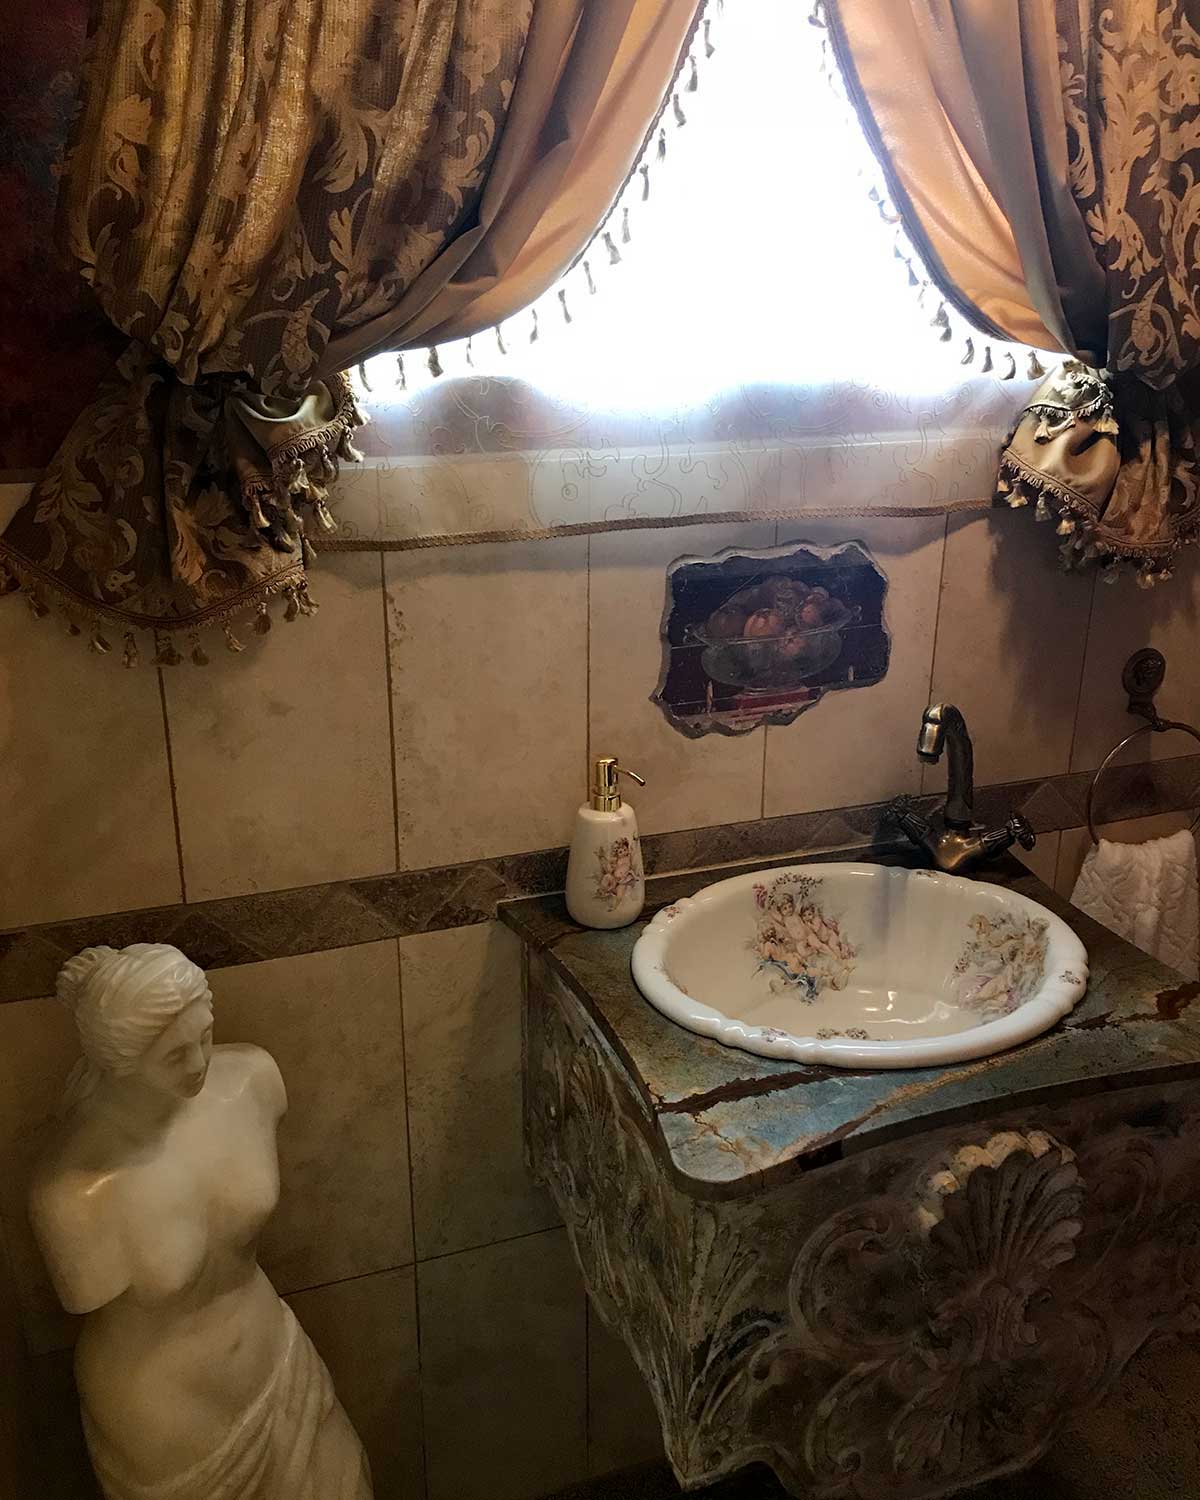 Old world style romantic bathroom Sith the cherubs design painted on the sink.